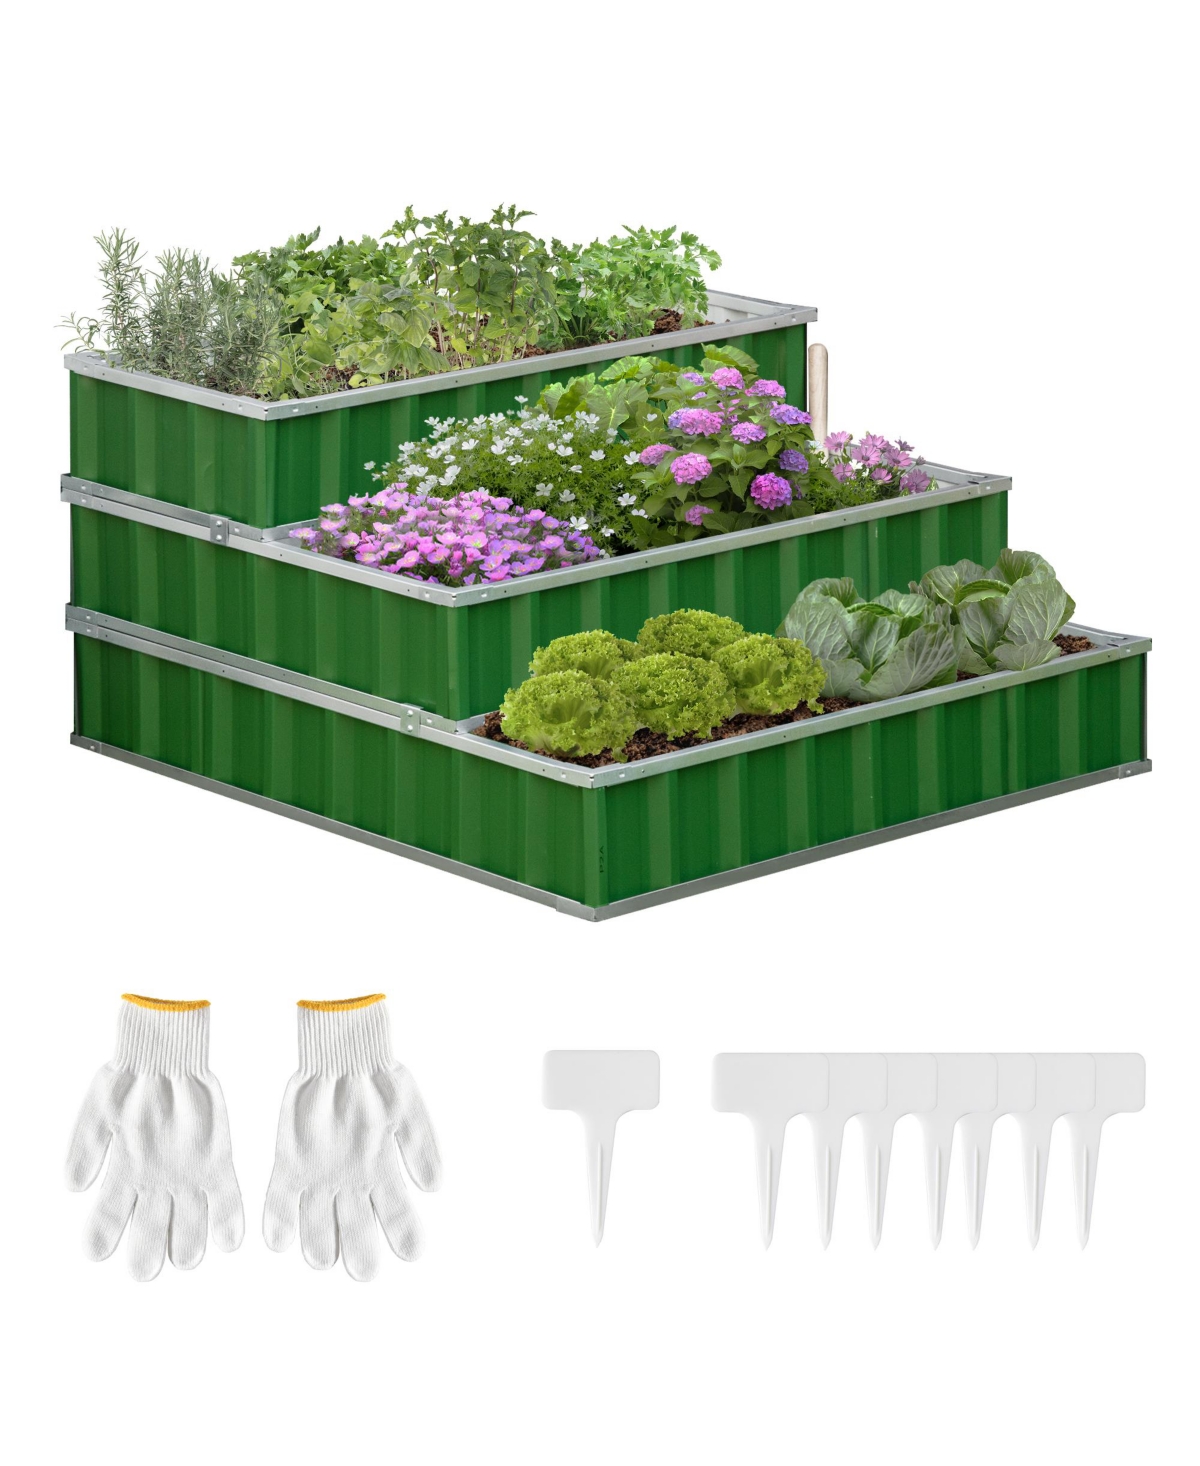 3 Tier Raised Garden Bed, Metal Planer Box w/ Gloves, Easy Assembly - Green